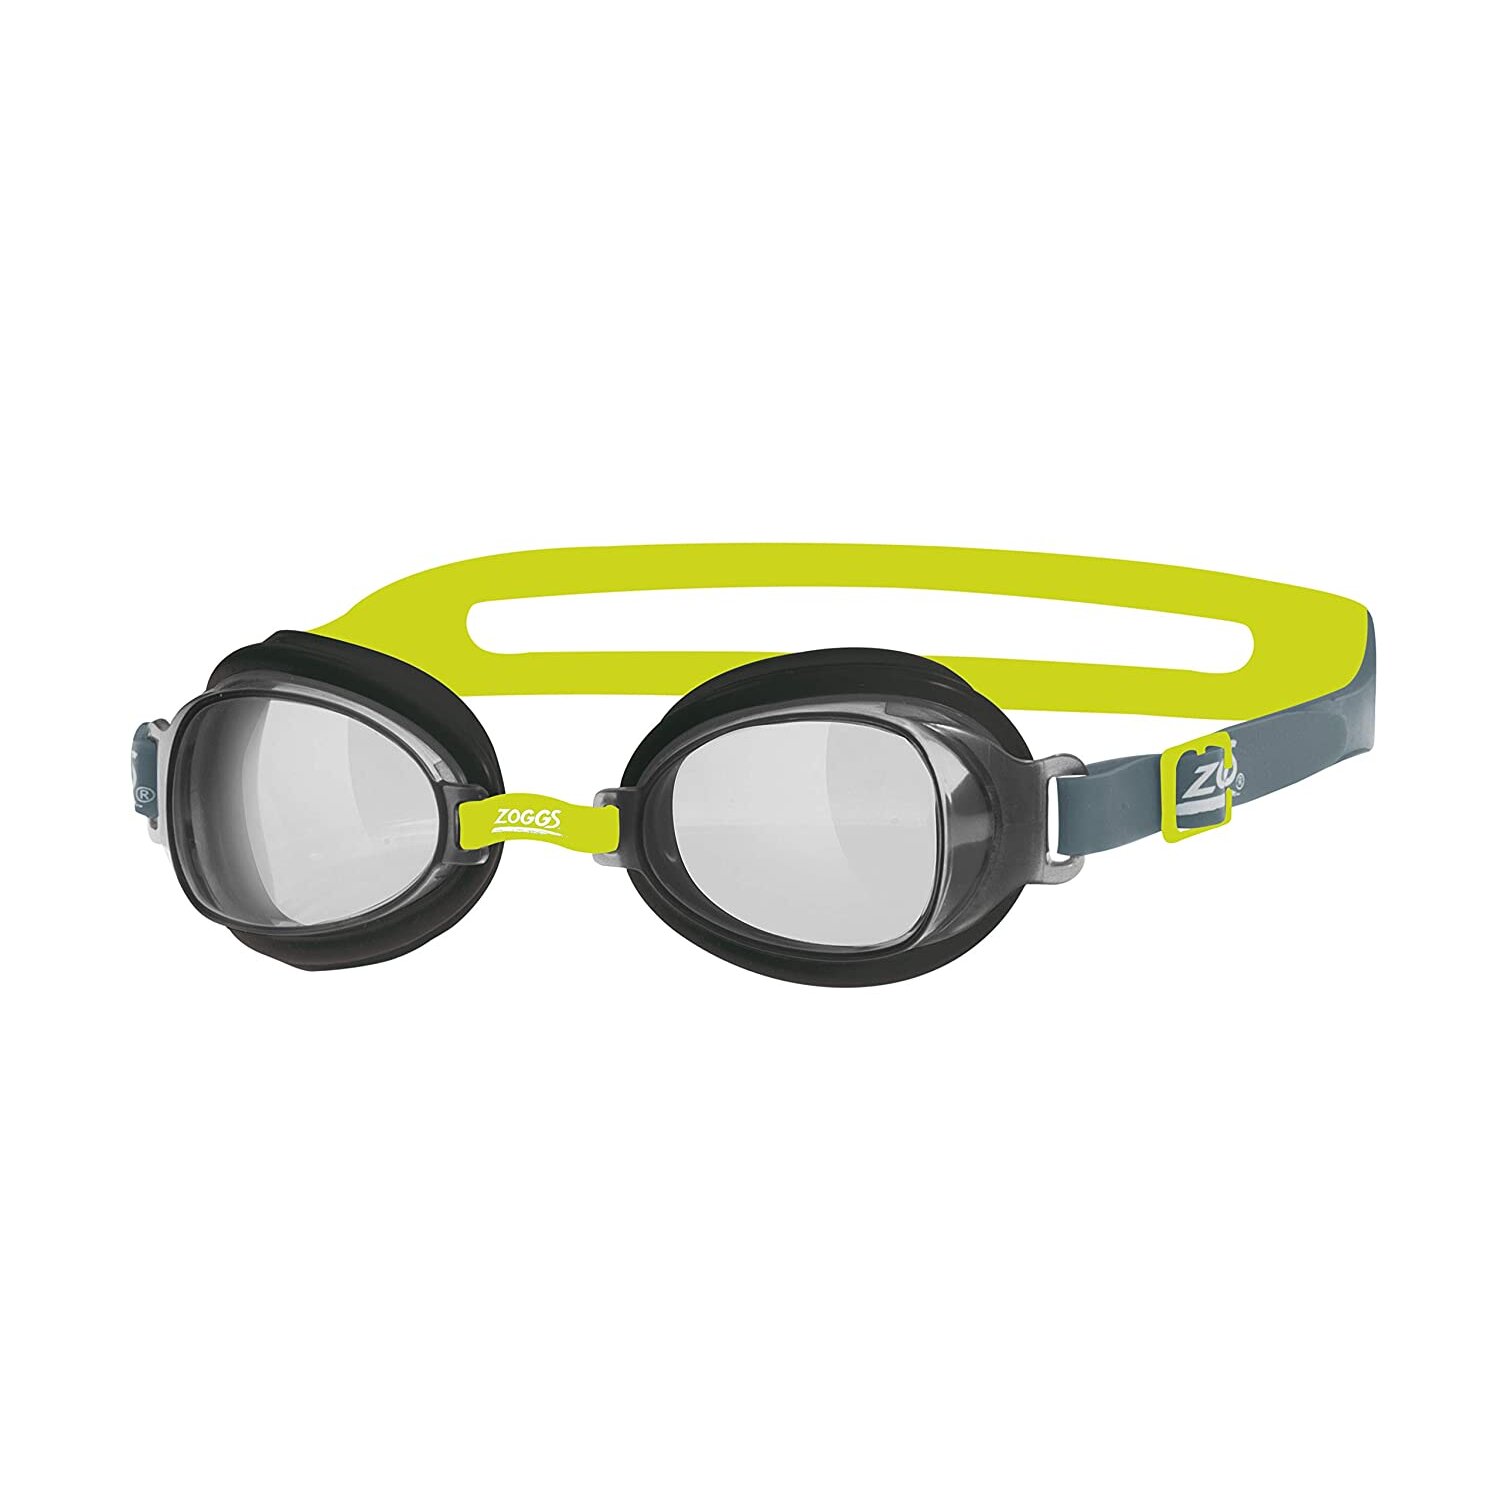 Zoggs Swimming Goggles with  Anti-Fog Lenses in Black/Lime/Smoke - One Size